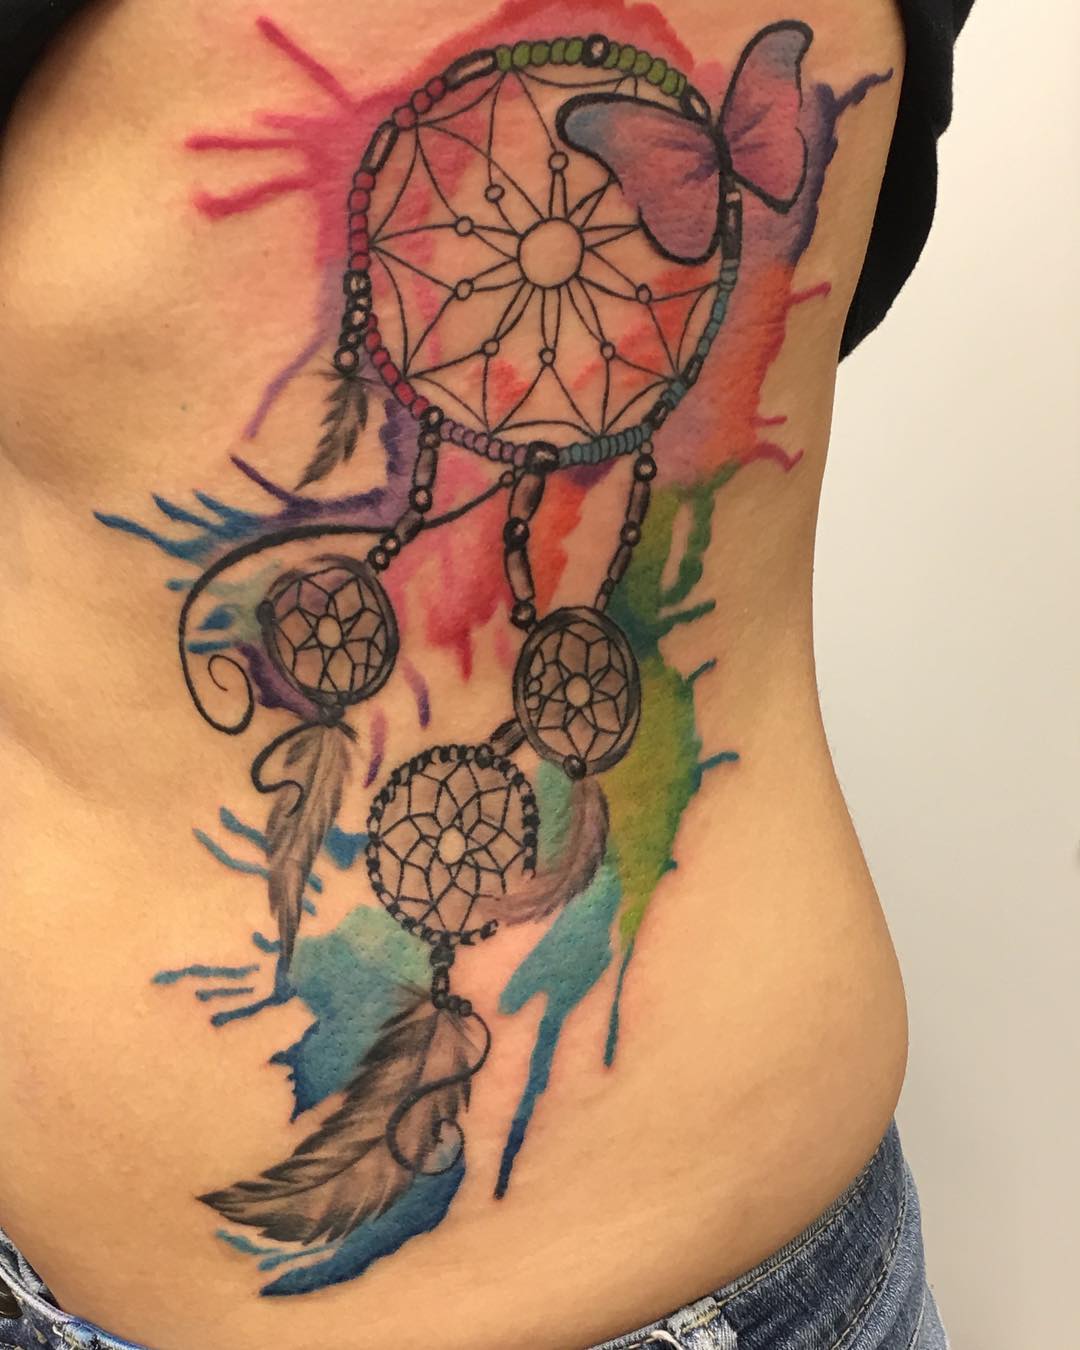 Watercolor dream catcher tattoo is a tattoo that has watercolor effect. The main idea behind this kind of tattoo is to make it look like it was painted on your skin with watercolors. Typically, they are very colorful and have a lot of details, which makes them quite interesting.